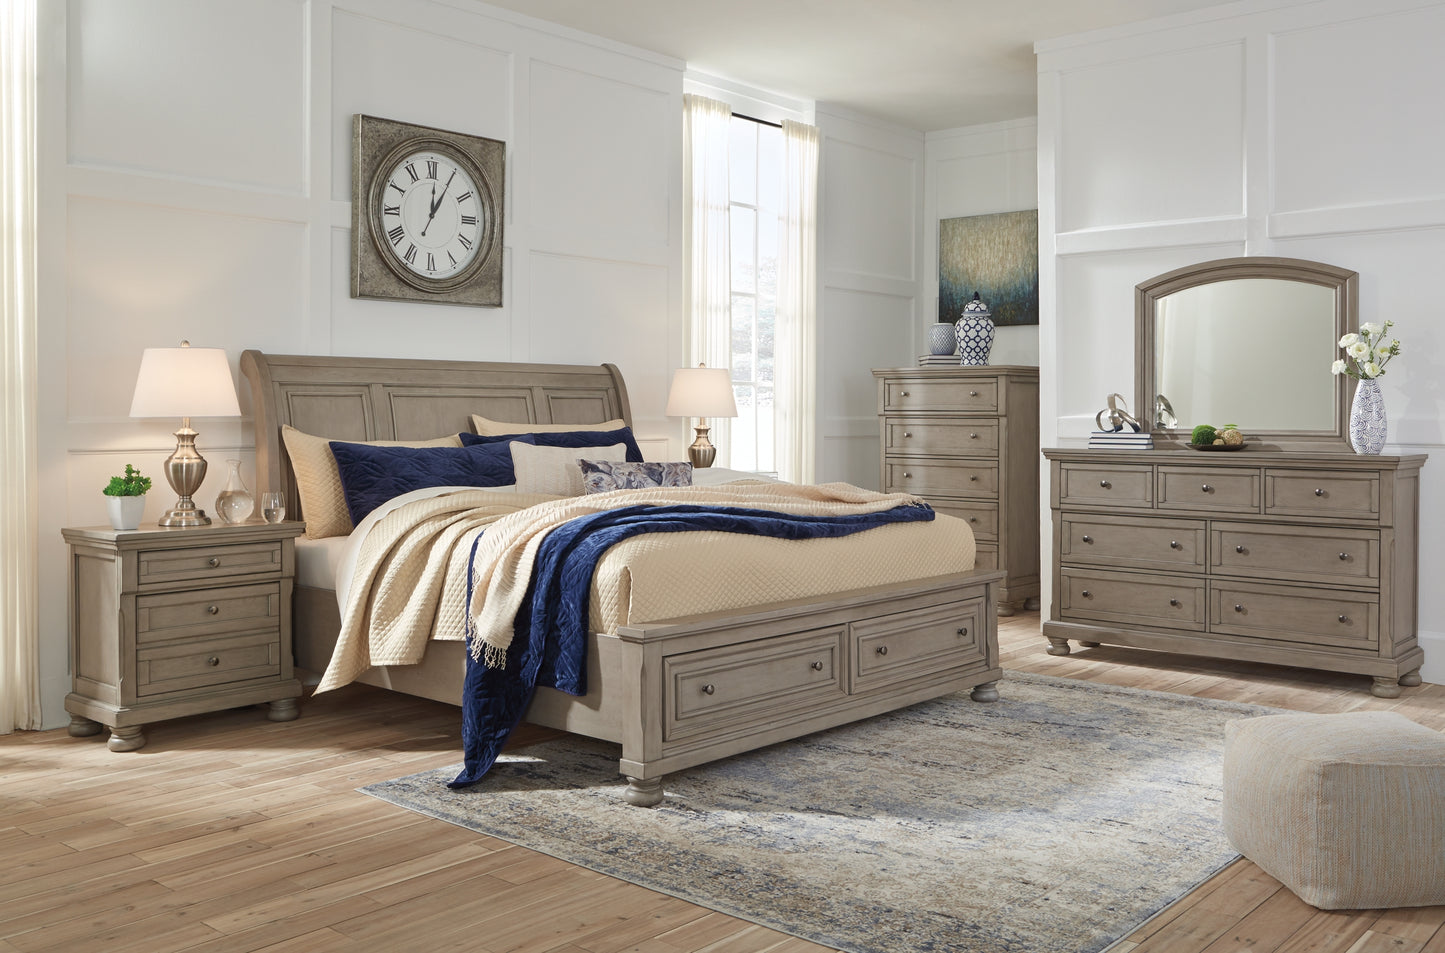 Lettner King Sleigh Bed with 2 Storage Drawers with Mirrored Dresser and Chest Wilson Furniture (OH)  in Bridgeport, Ohio. Serving Bridgeport, Yorkville, Bellaire, & Avondale